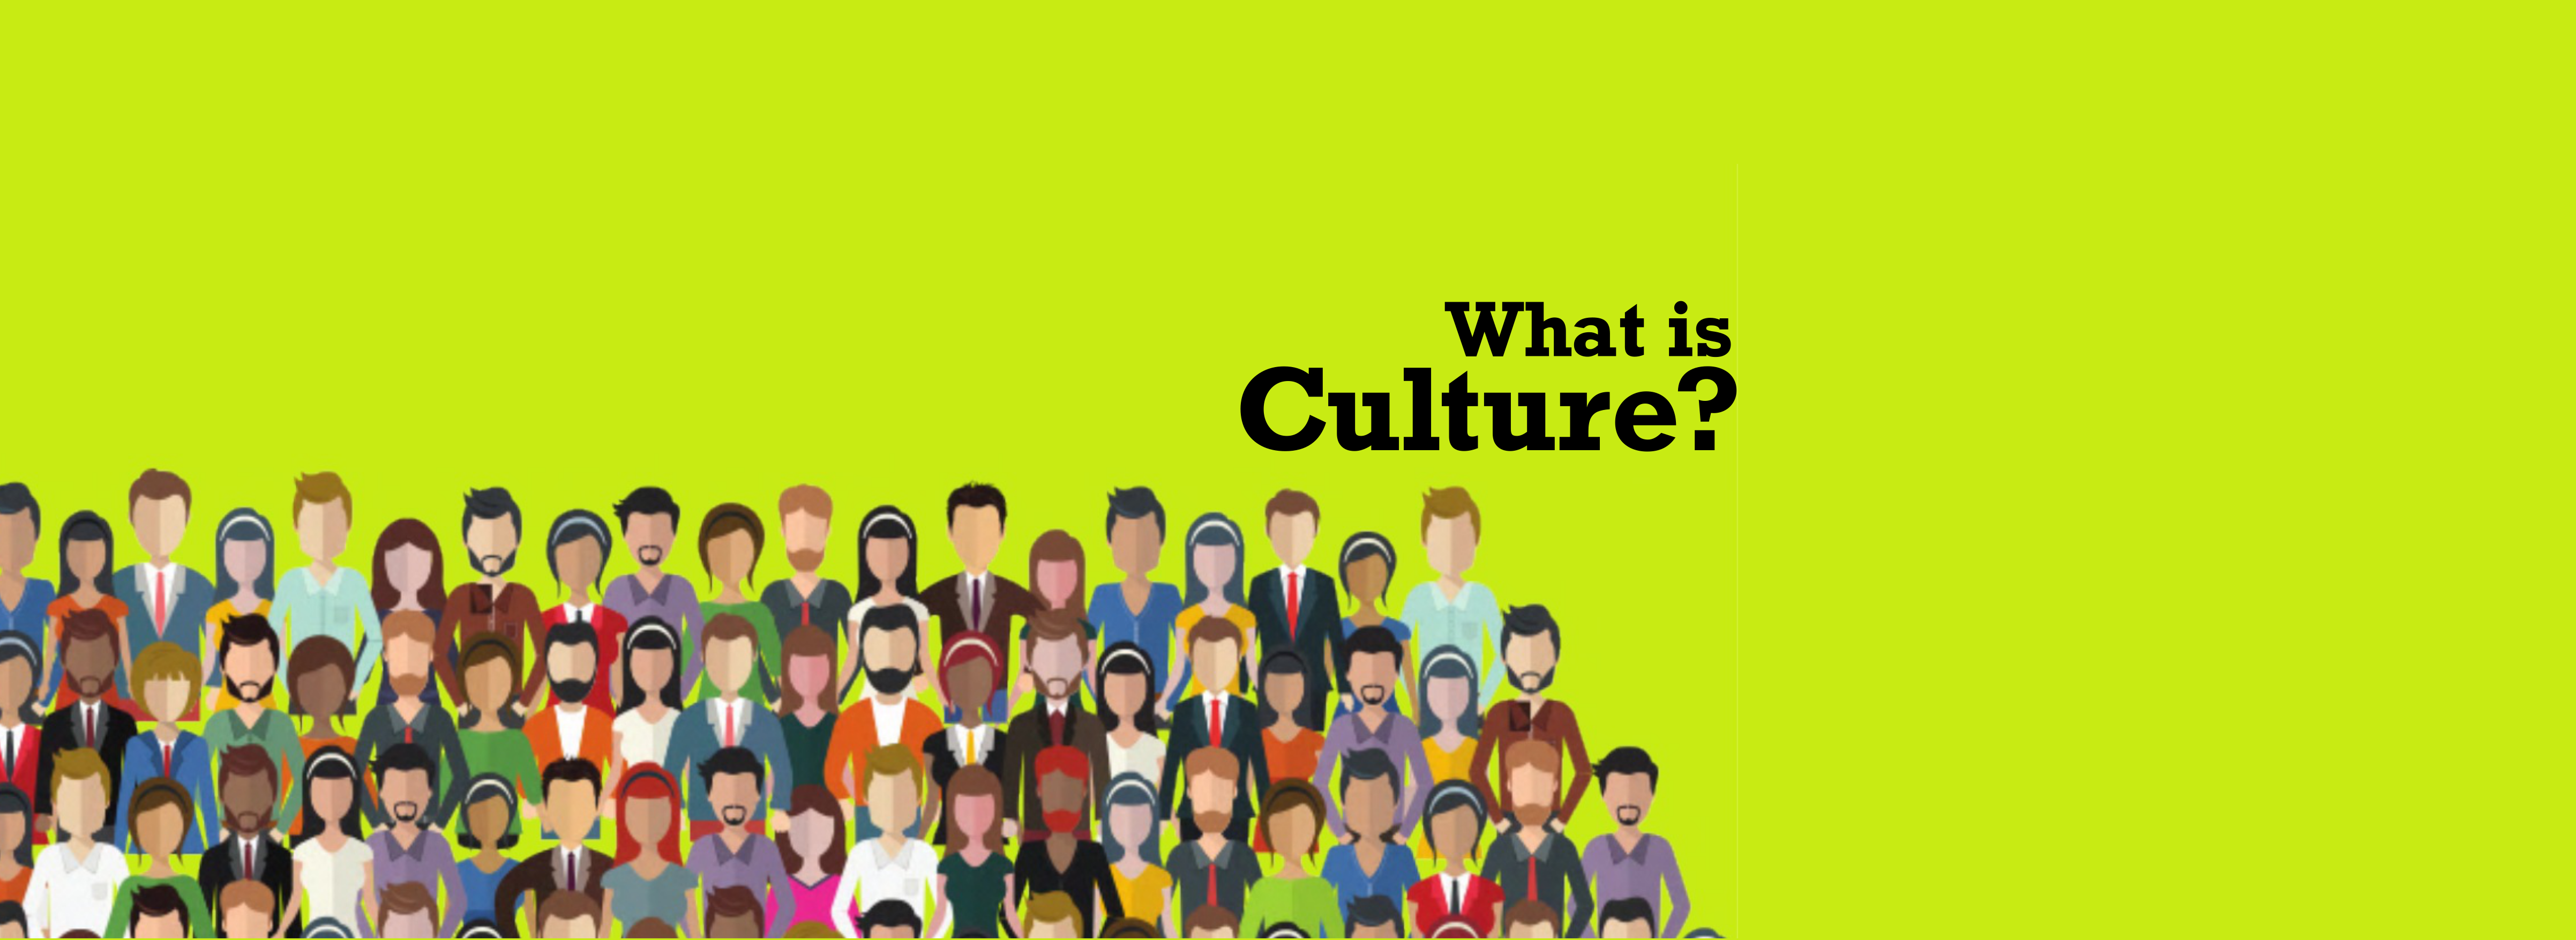 What is Culture? - GlobalPeople Consulting